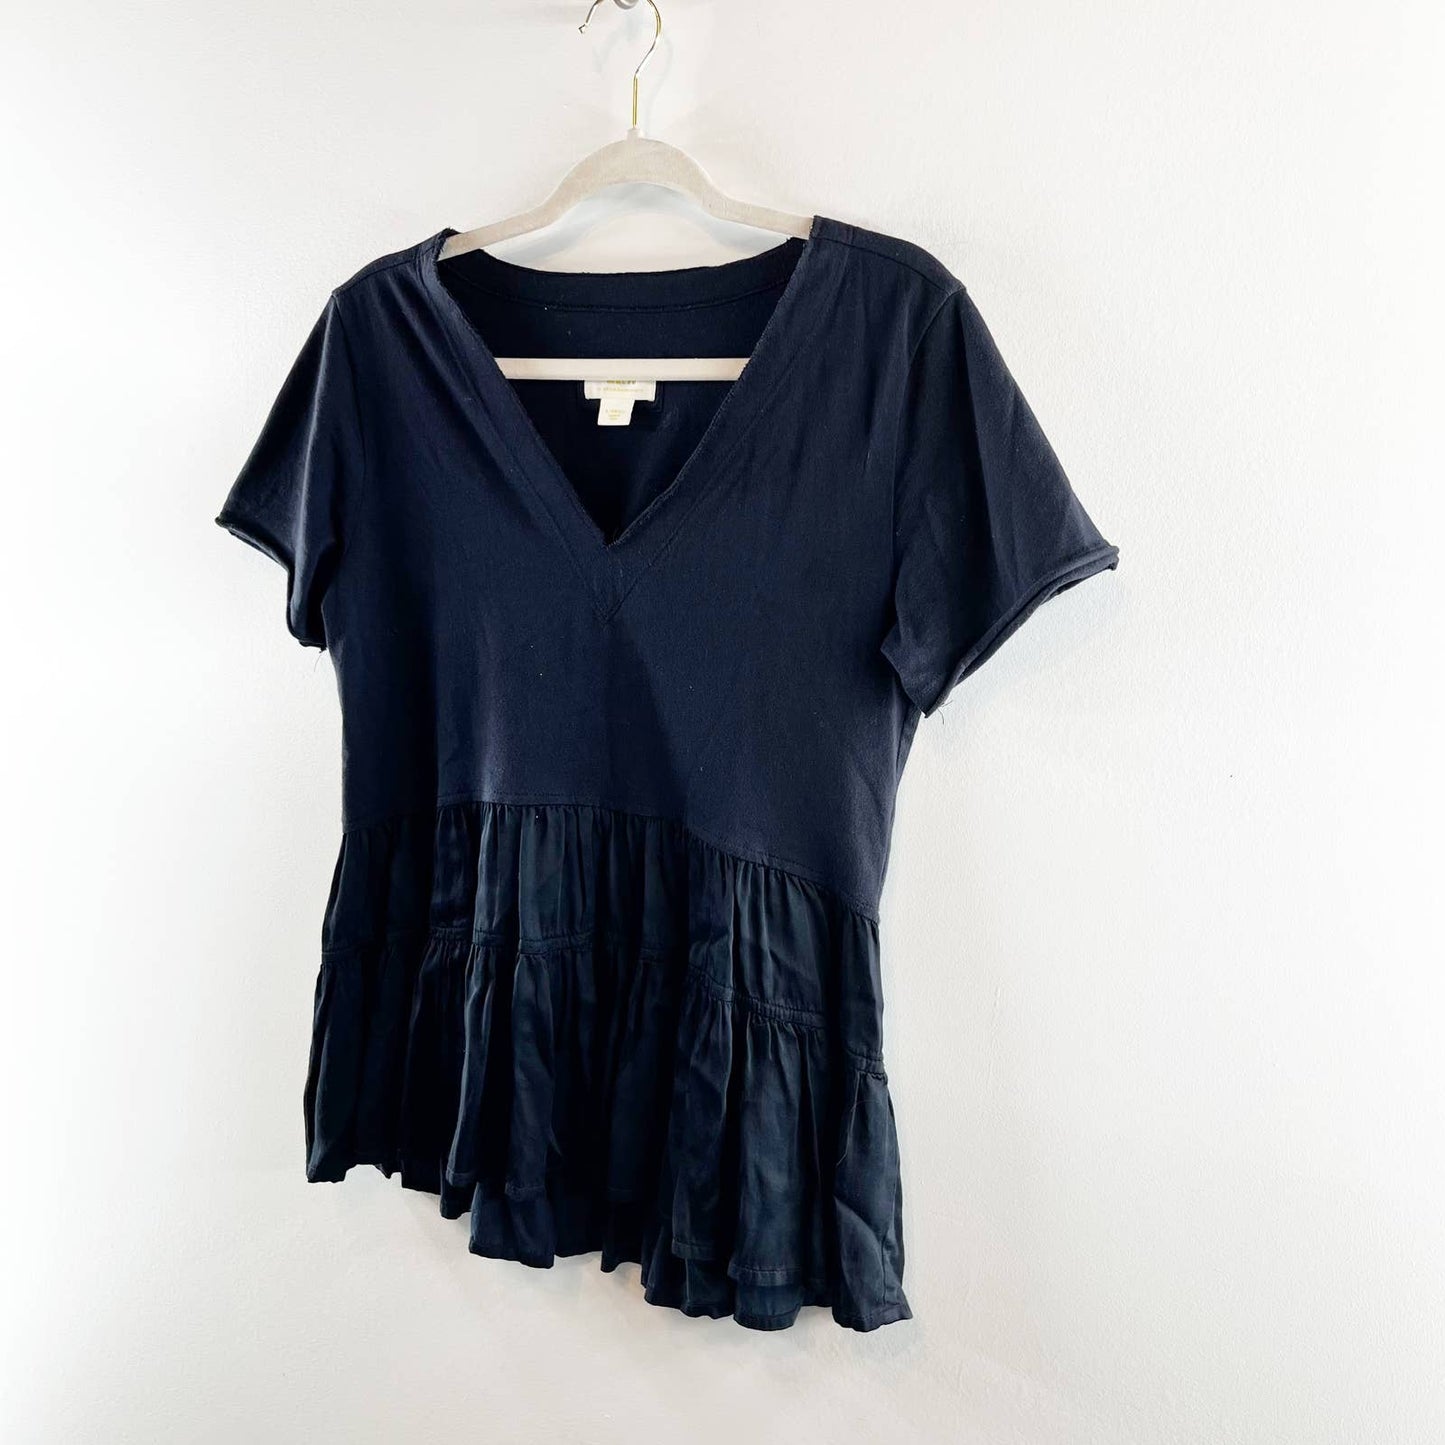 Anthropologie Maeve Black V-neck Louisa Tiered Peasant Babydoll Tee Shirt Top XS